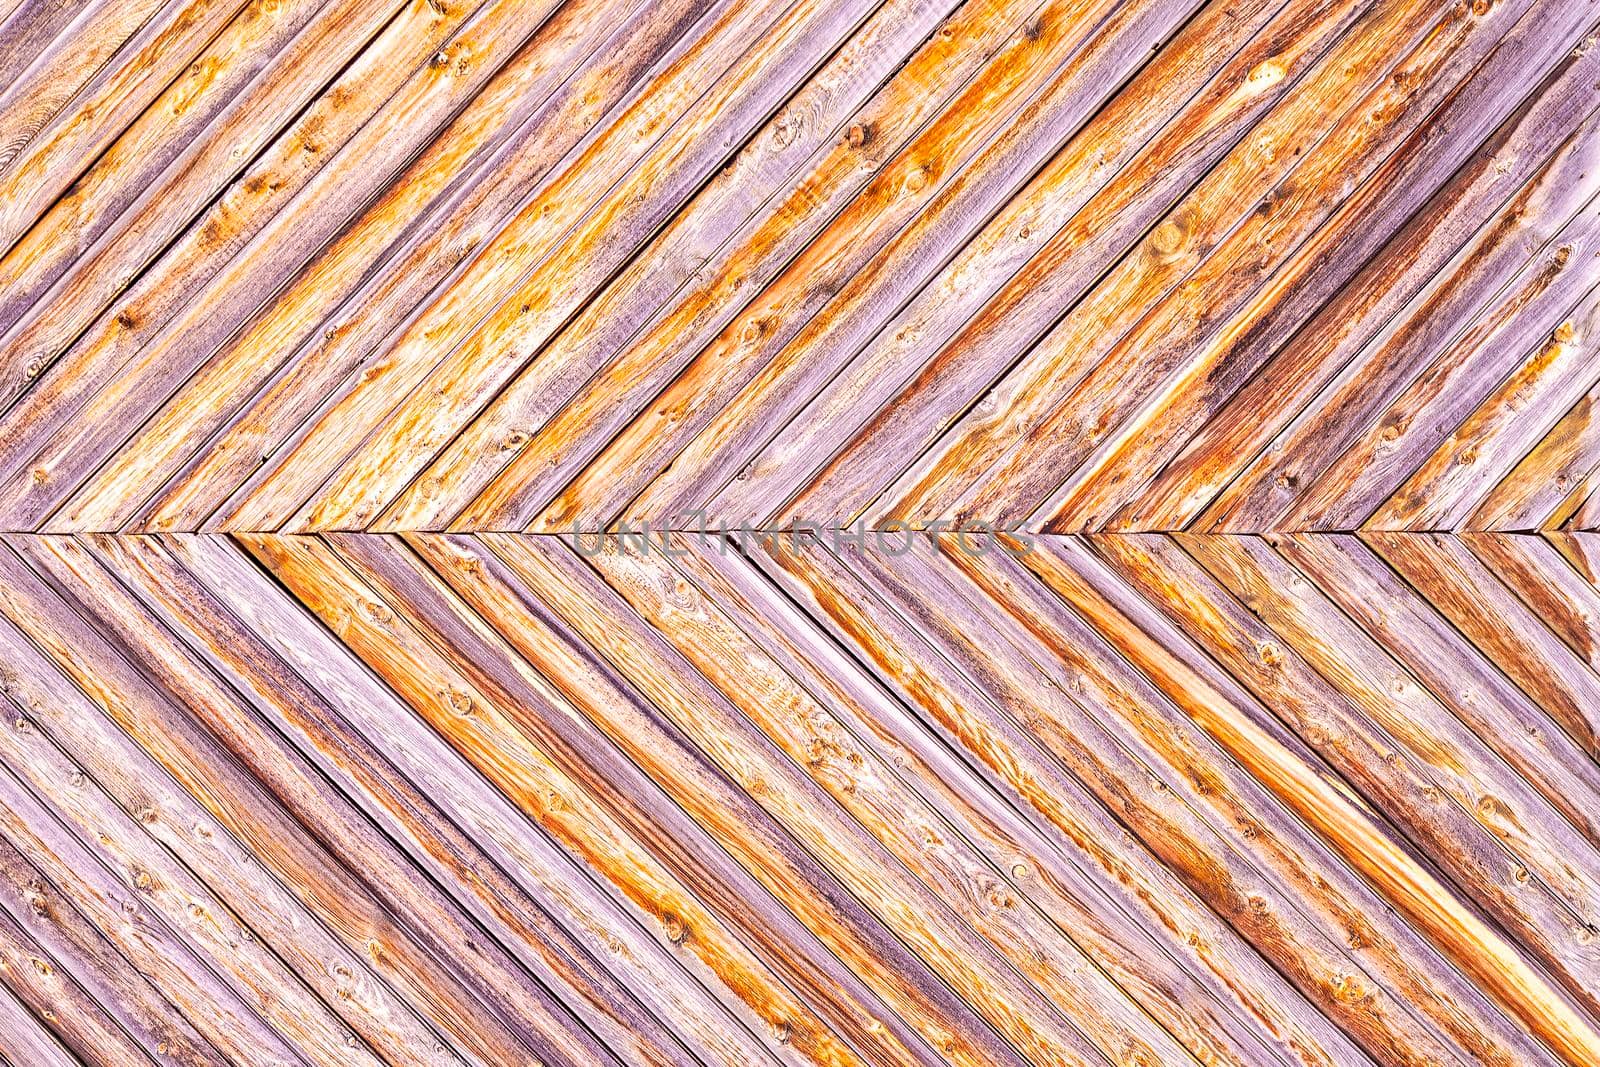 The background is made of narrow wooden planks at an angle to each other. by Essffes